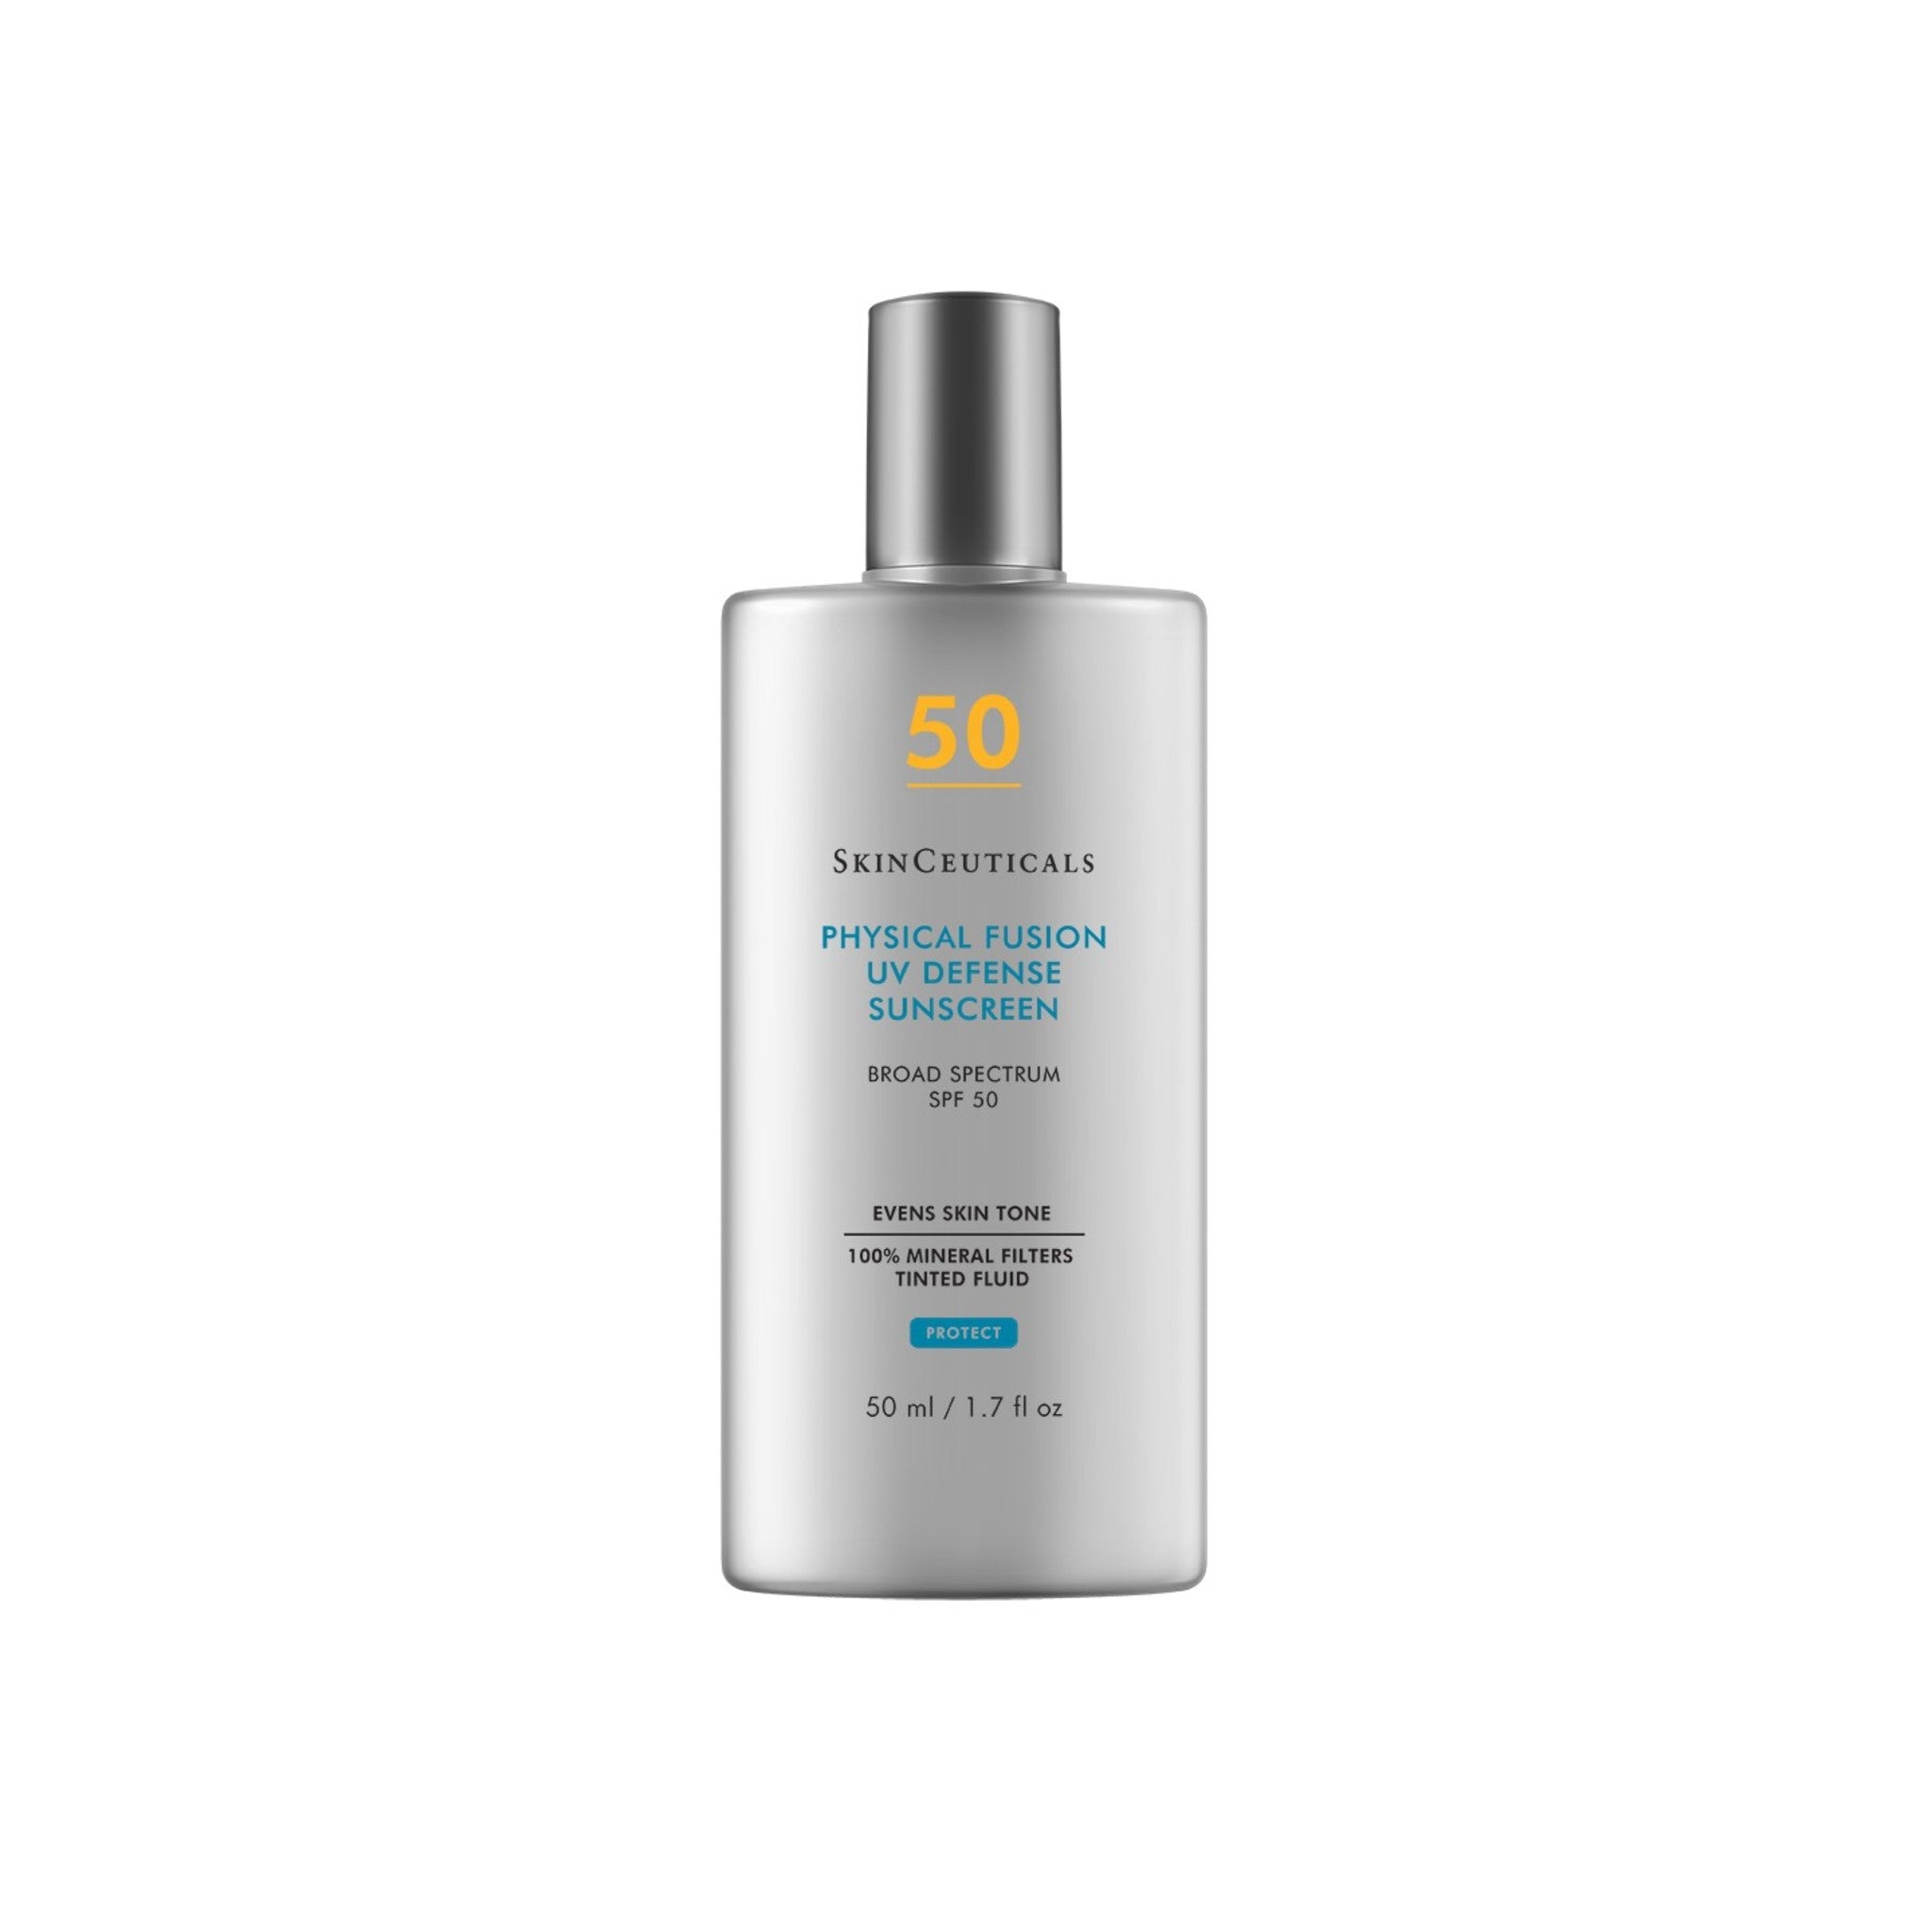 SkinCeuticals Physical Fusion UV Defense SPF 50 Size variant: 1.7 oz | 50 ml main image.